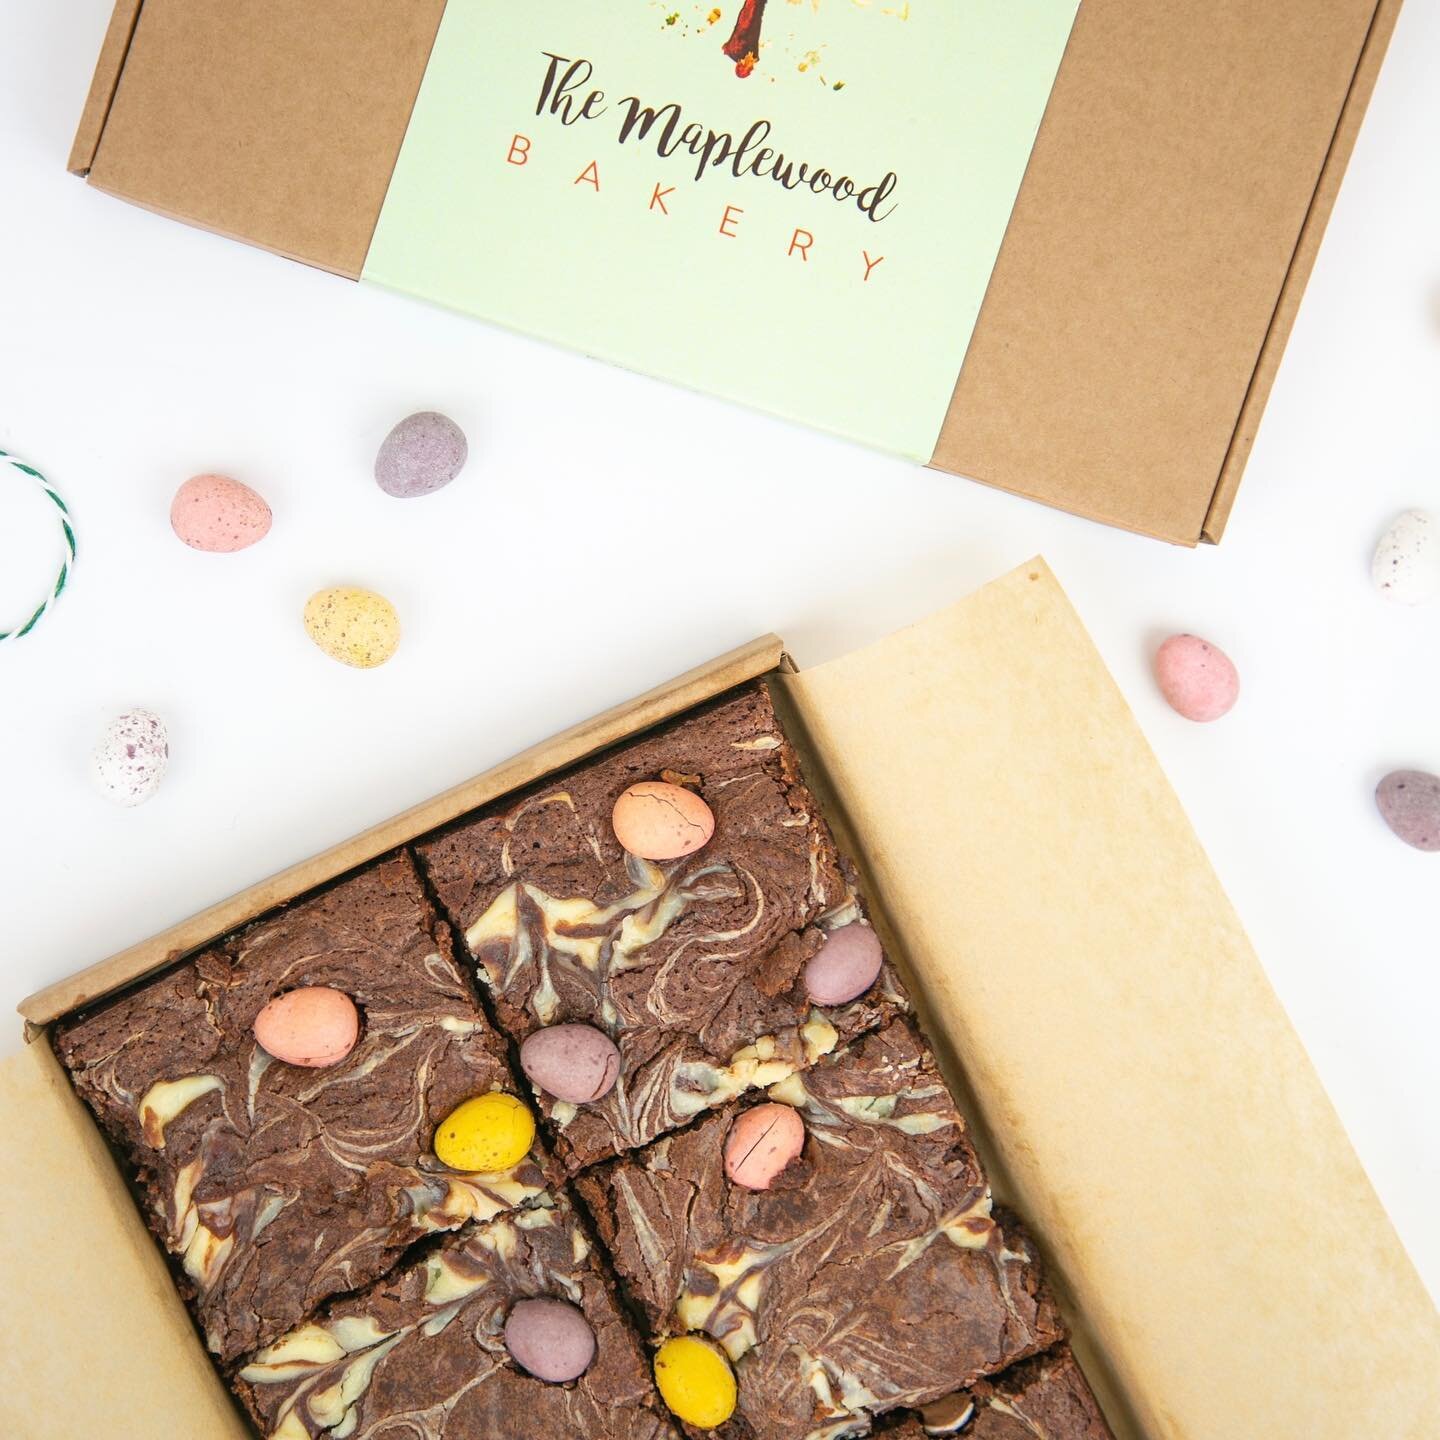 Easter goodies are here!!! 🐣

Postal brownies and Easter mini cakes are all available to pre-order online.. follow the link in bio!

Treat some-bunny special this Easter!🐰